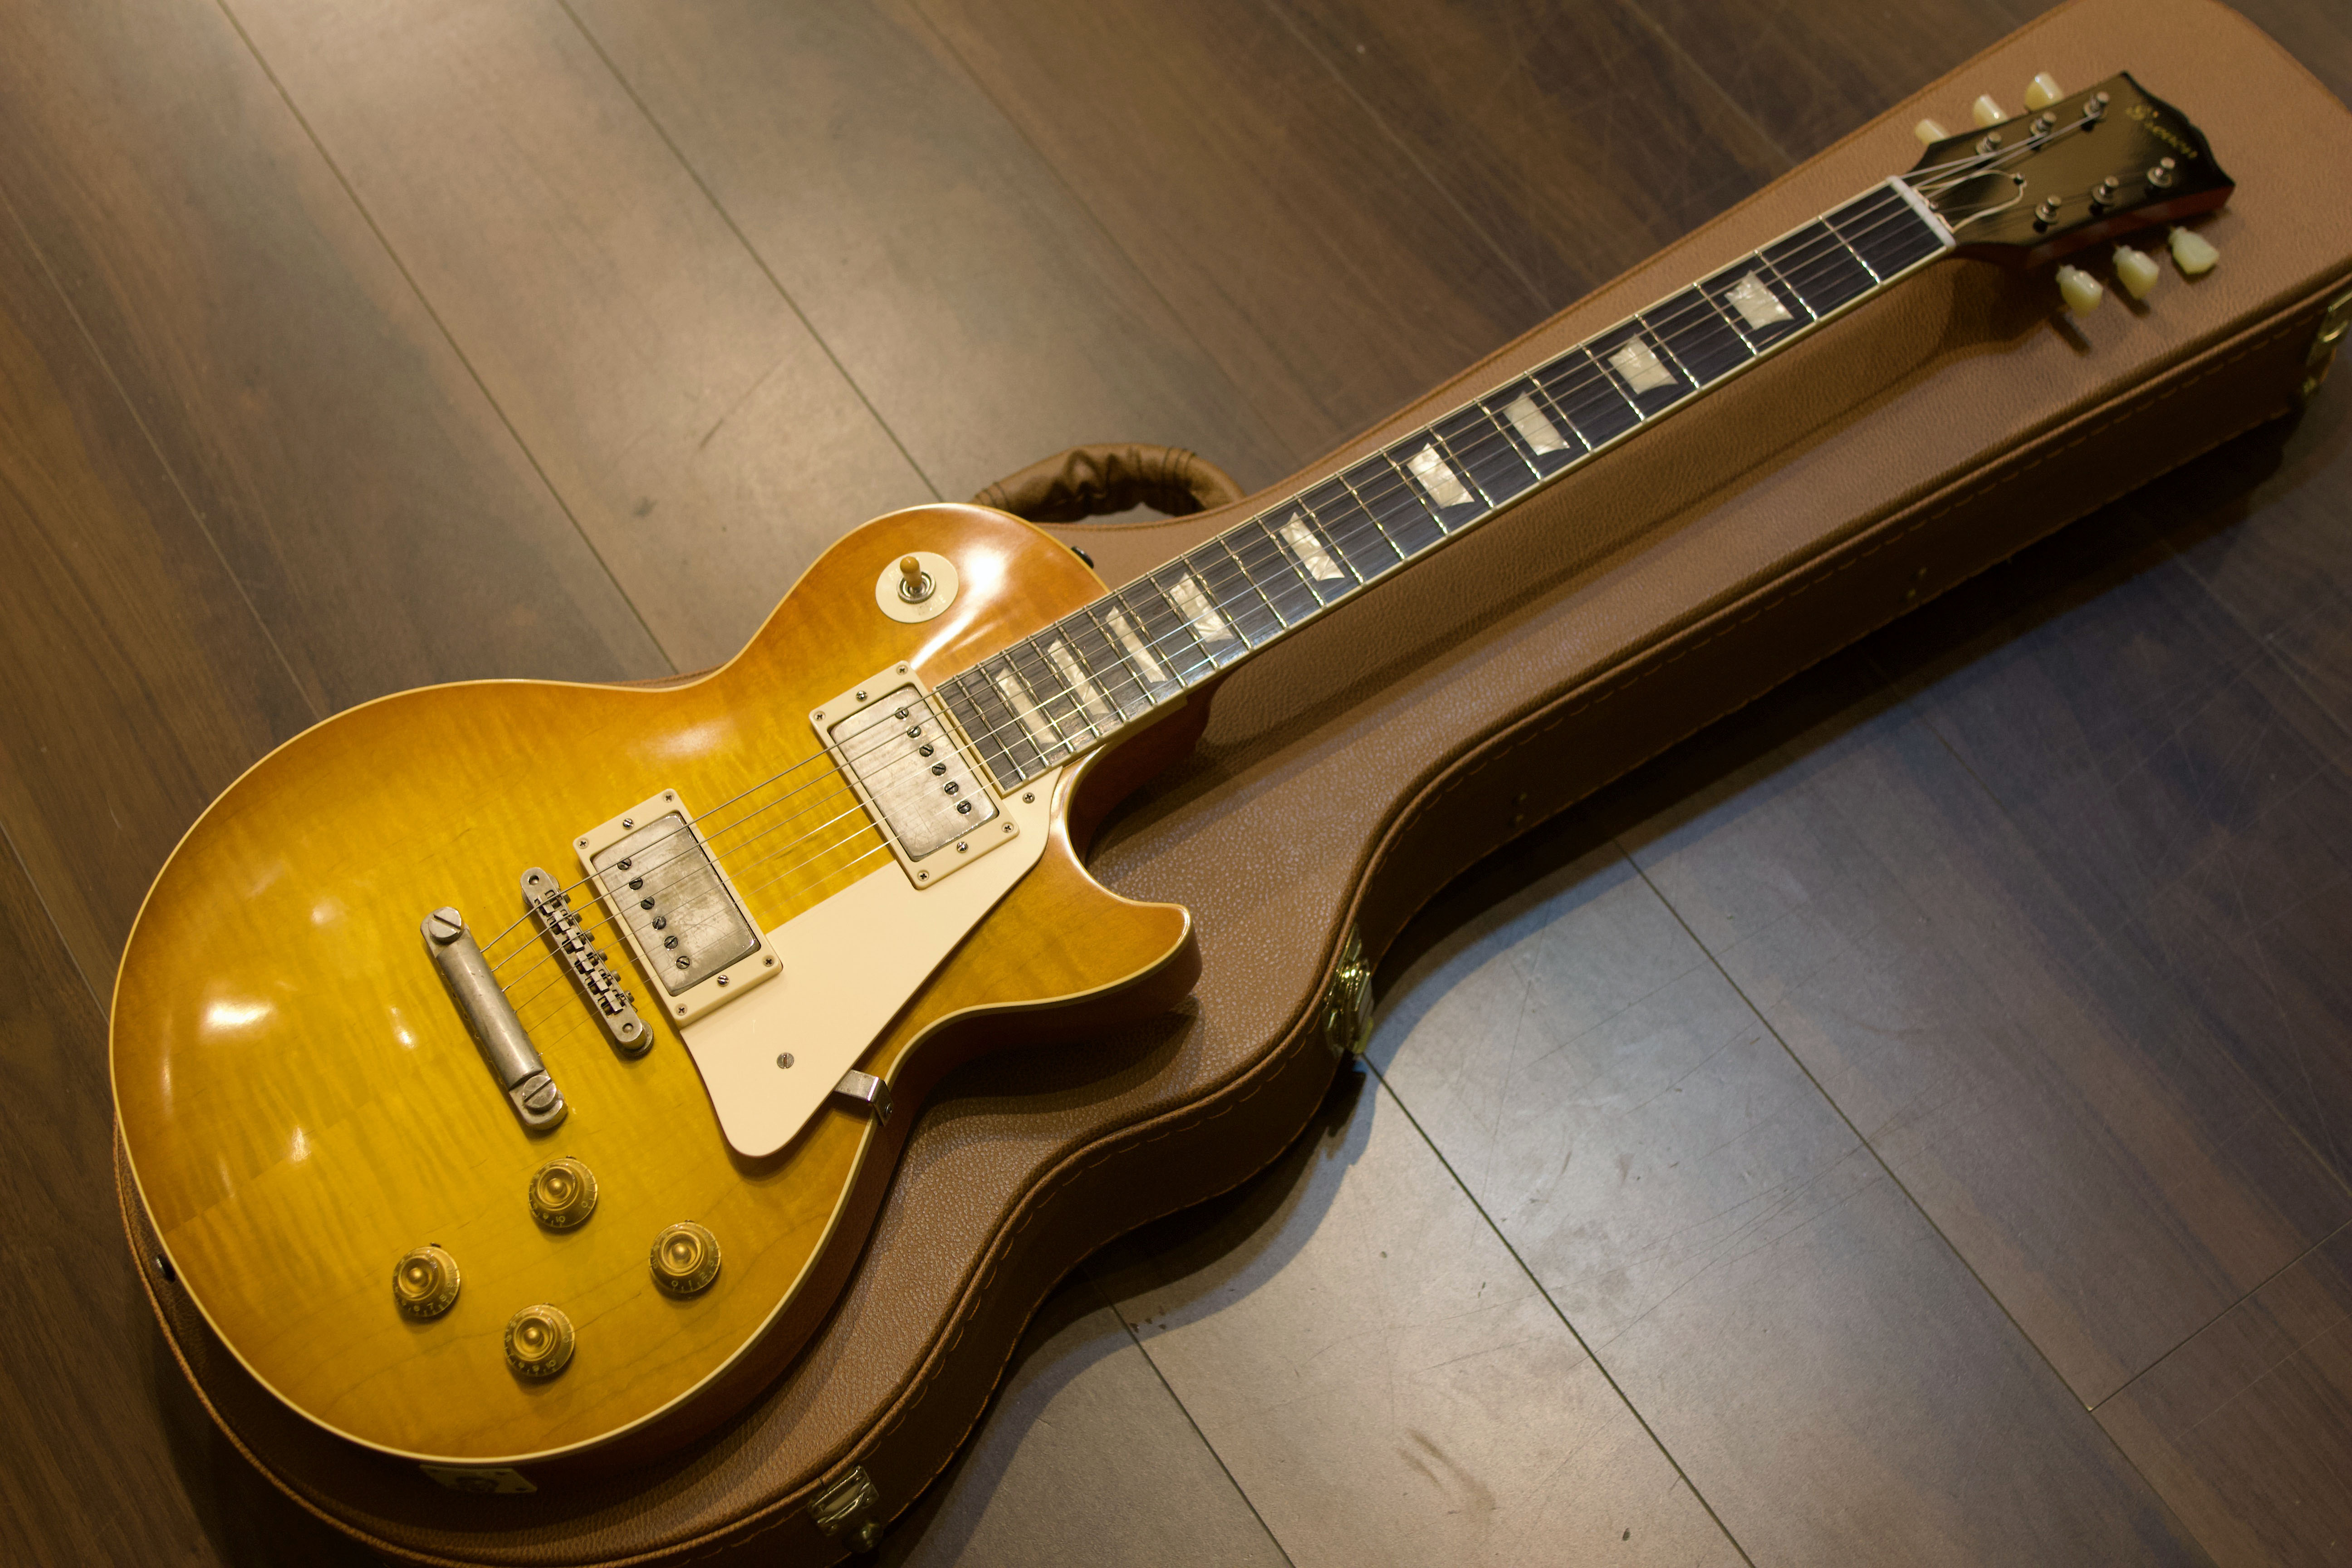 g7 Special g7-LPS Series9 2A Top "59 BURST"